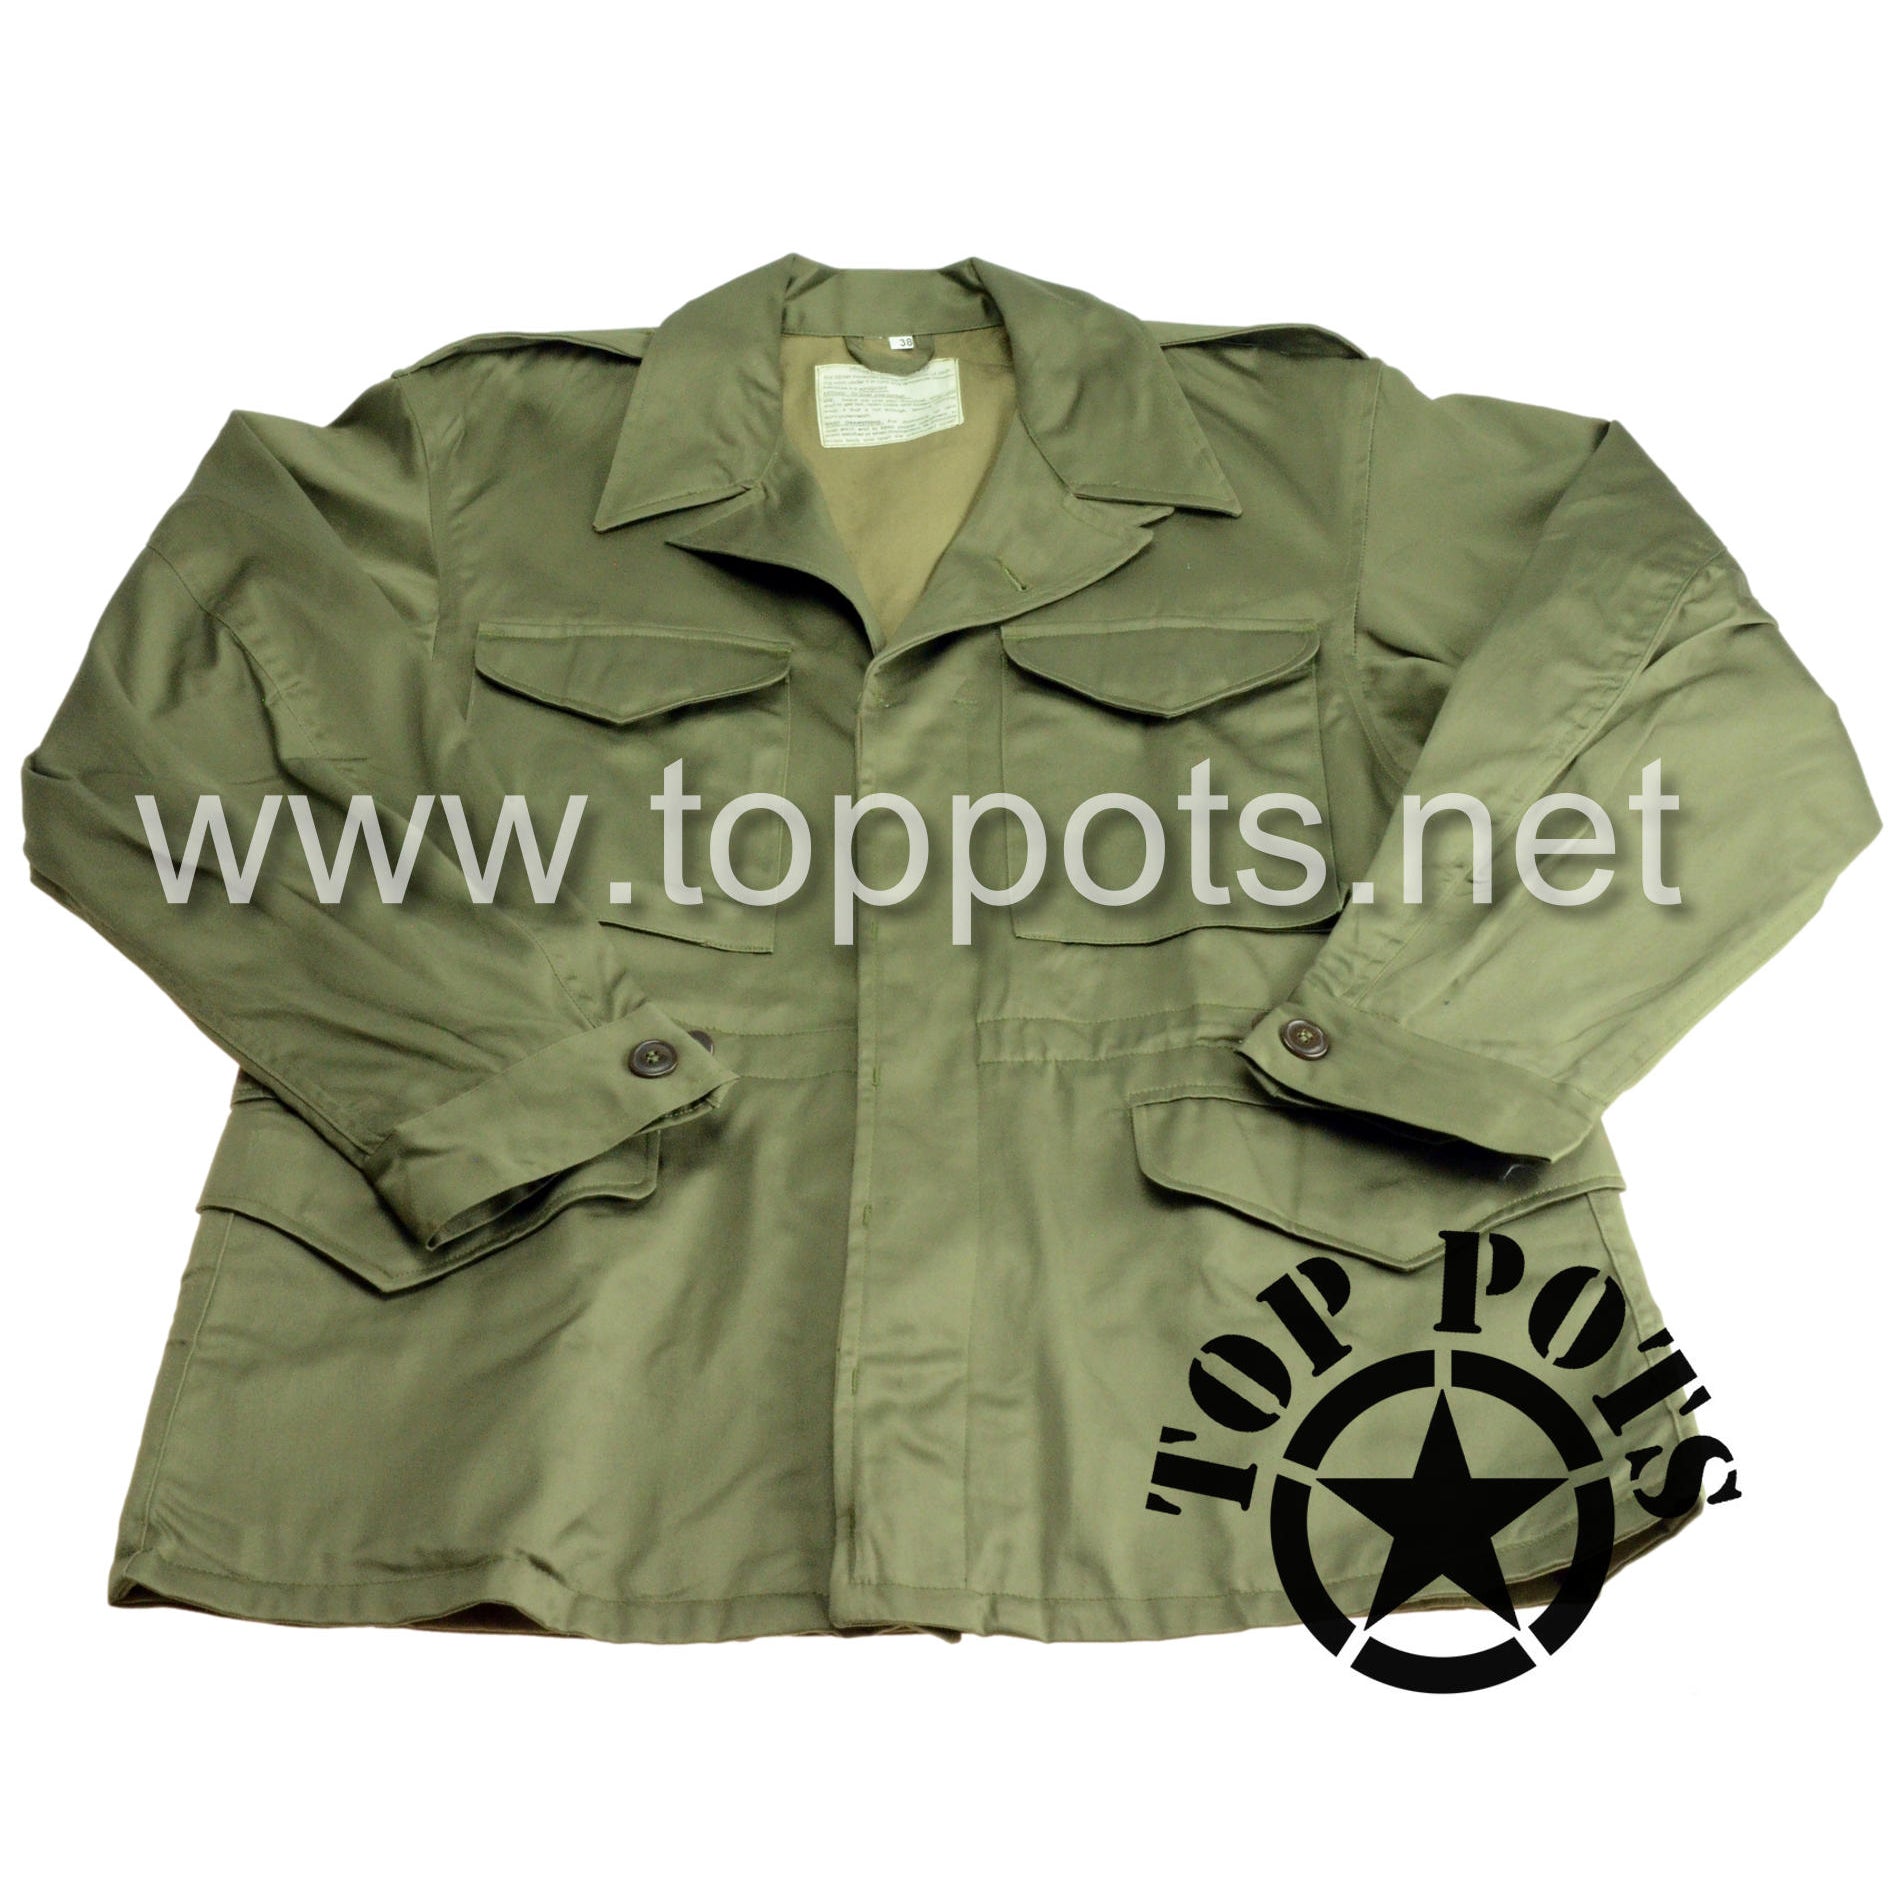 WWII US Army Reproduction M1943 Cotton Combat Uniform Field Jacket